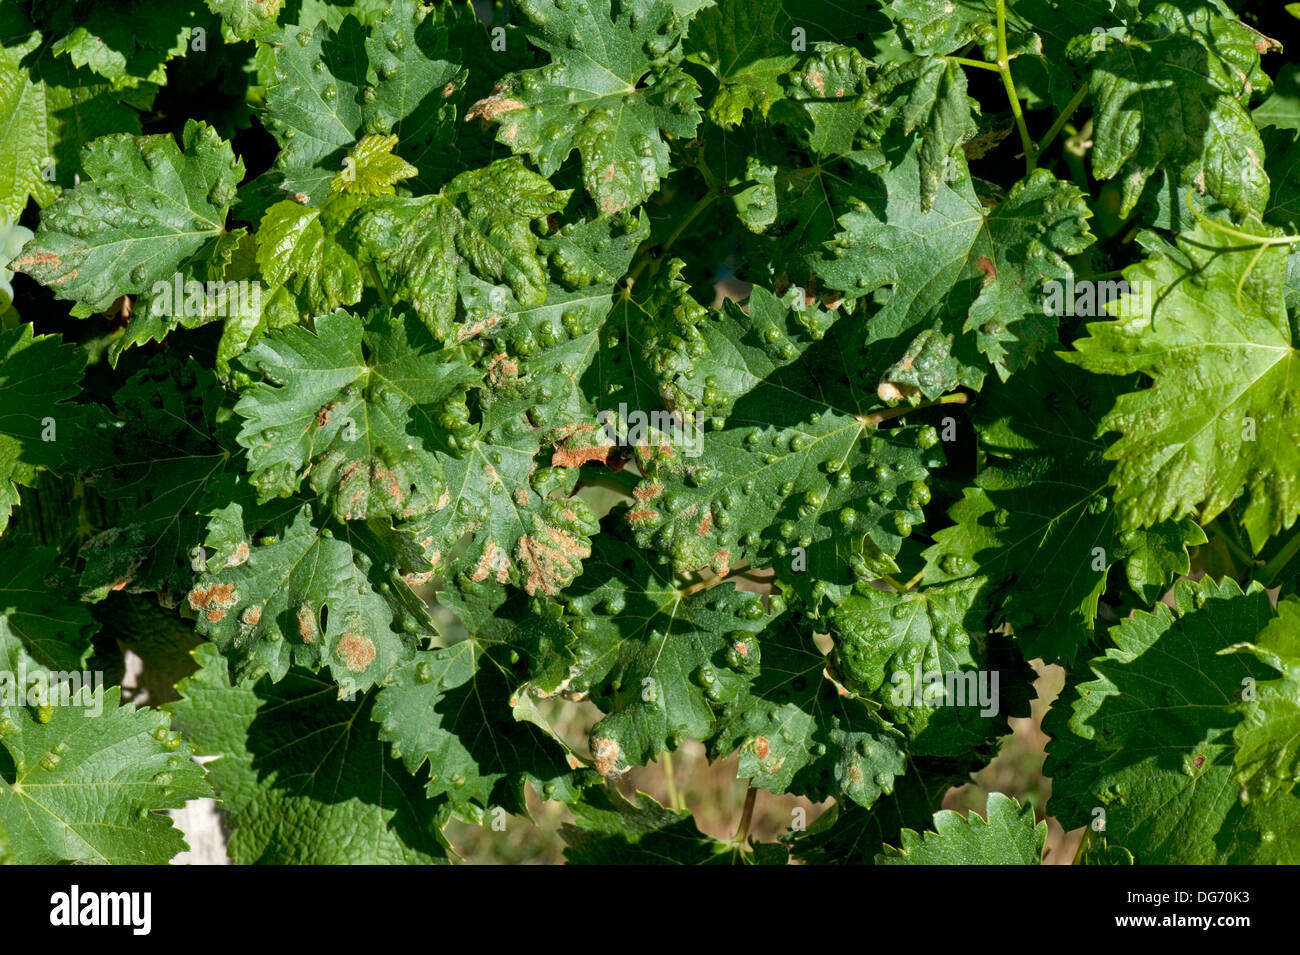 Grapevine blister mite, Eriophyes vitis, damage blisters on the upper surface of vine leaves in France Stock Photo